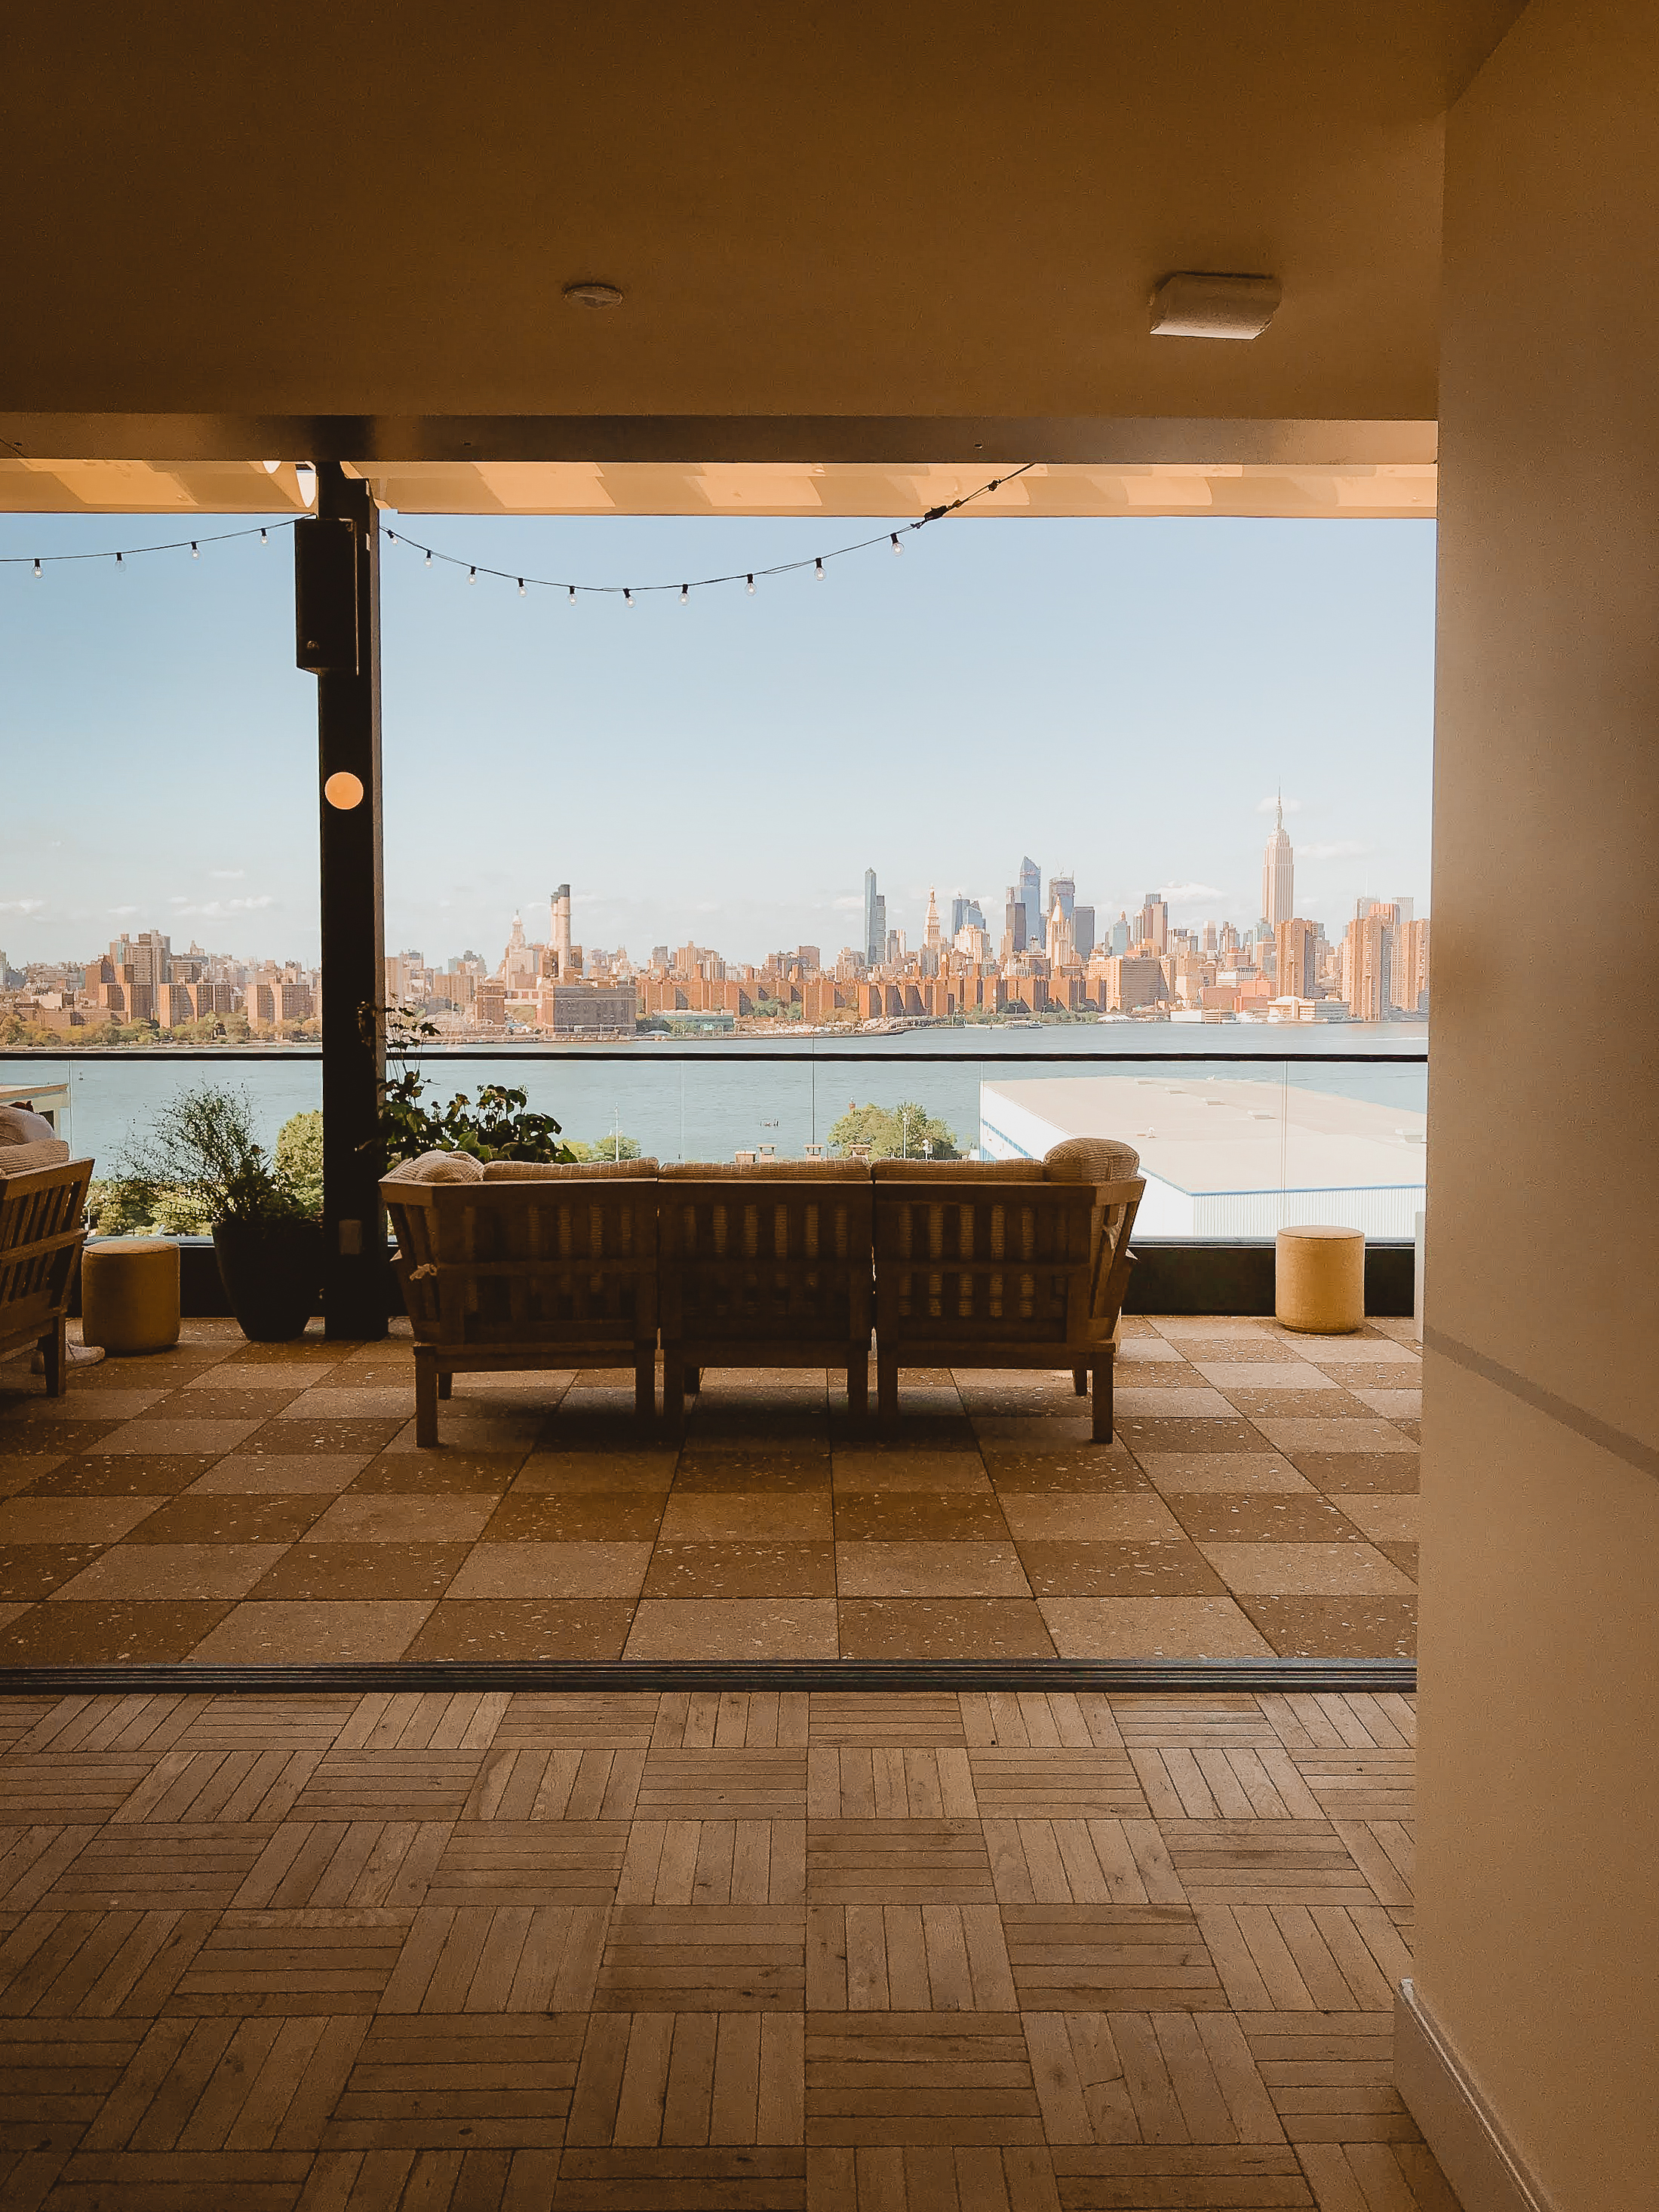 What To Do On A Fall Day in Williamsburg: Rooftop Bars and Smorgasburg Overthrow Boxing Brooklyn New York Mahattan travel guide SVADORE workout Saturday weekend smorgasburg the hoxton the wythe summerly klein william vale rooftop bars ferry